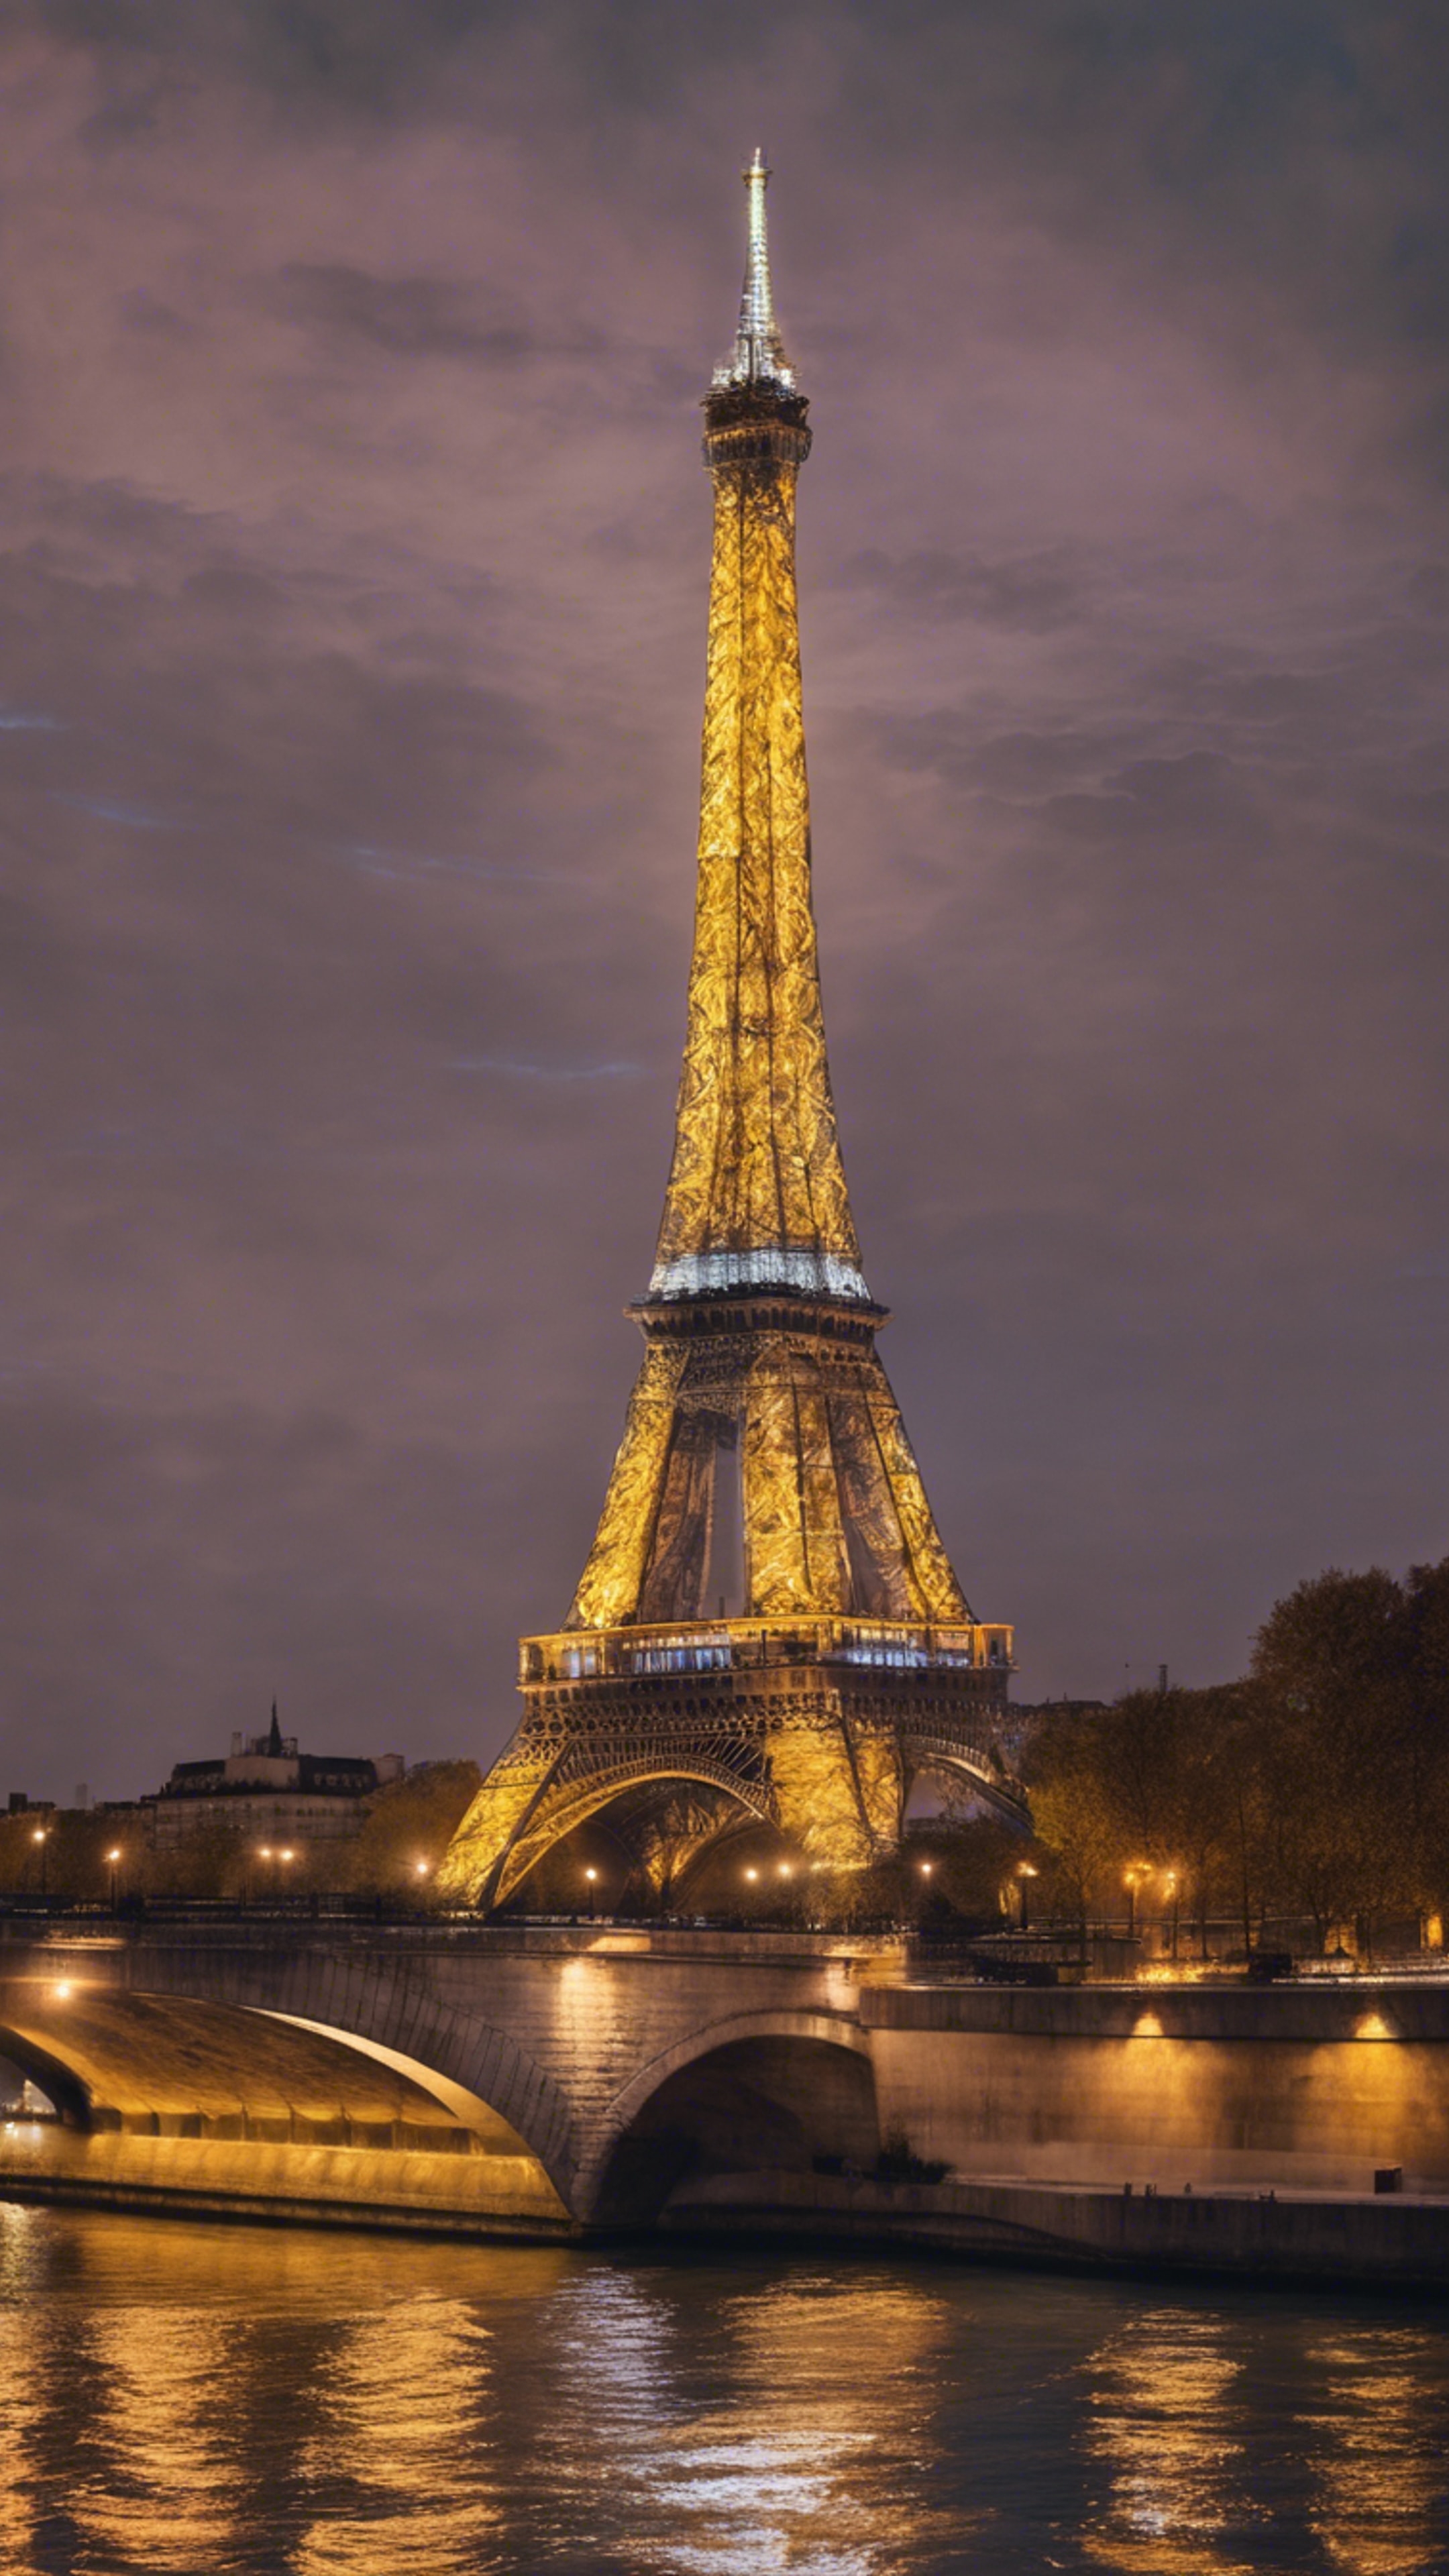 Eiffel tower illuminated against the Paris skyline at night, reflecting in the smooth waters of the river Seine. Ფონი[bfd7e83086d14adeb14c]